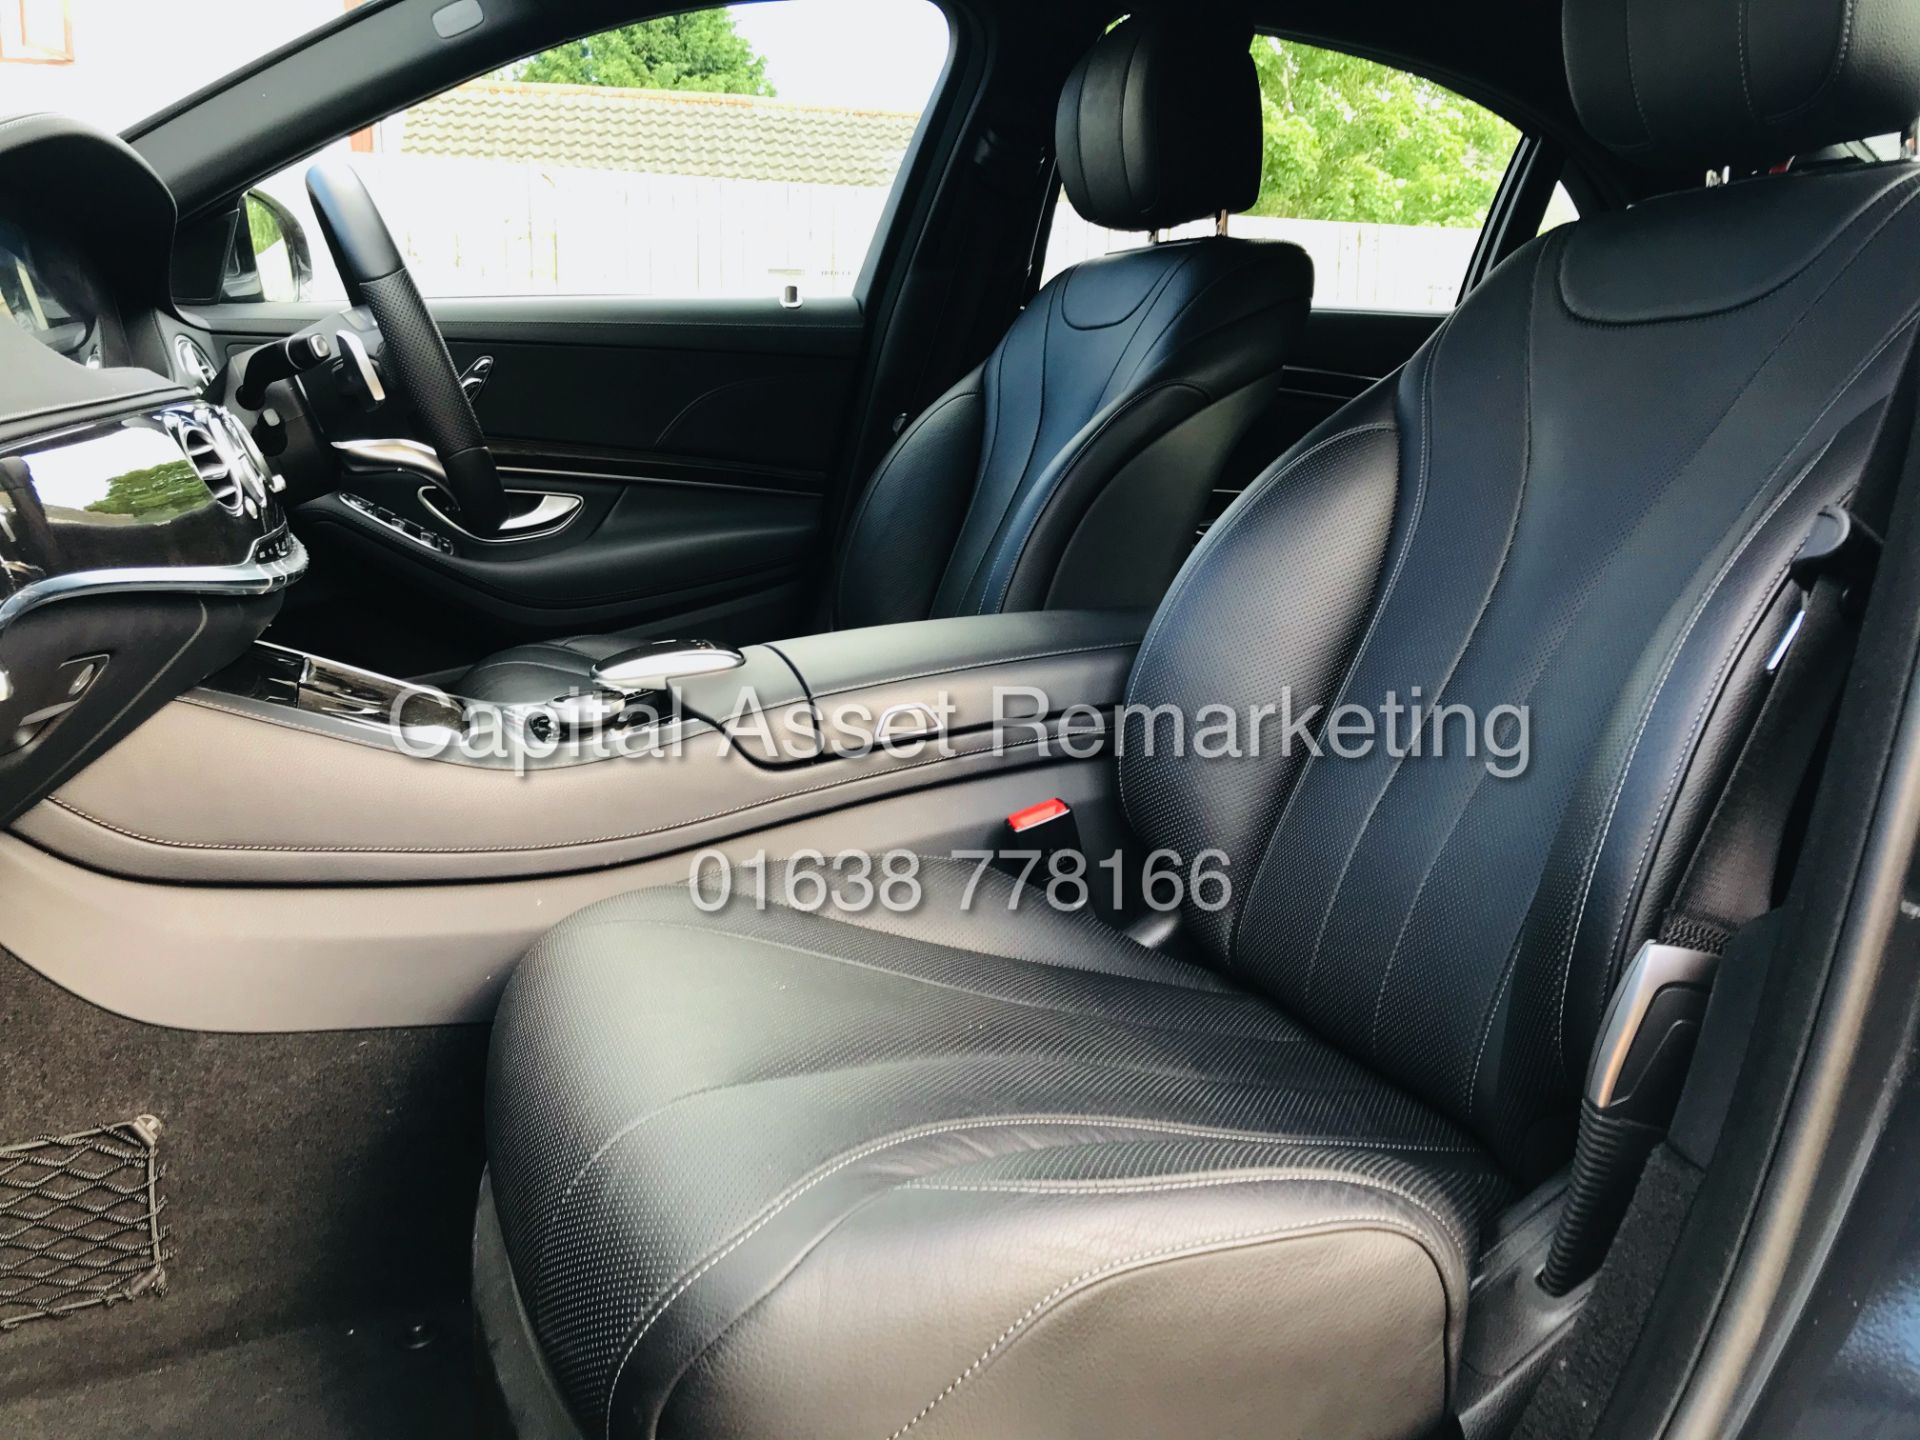 (On Sale) MERCEDES-BENZ S350D LWB *AMG LINE - EXECUTIVE SALOON* (2019) 9-G TRONIC *TOP OF THE RANGE* - Image 21 of 23